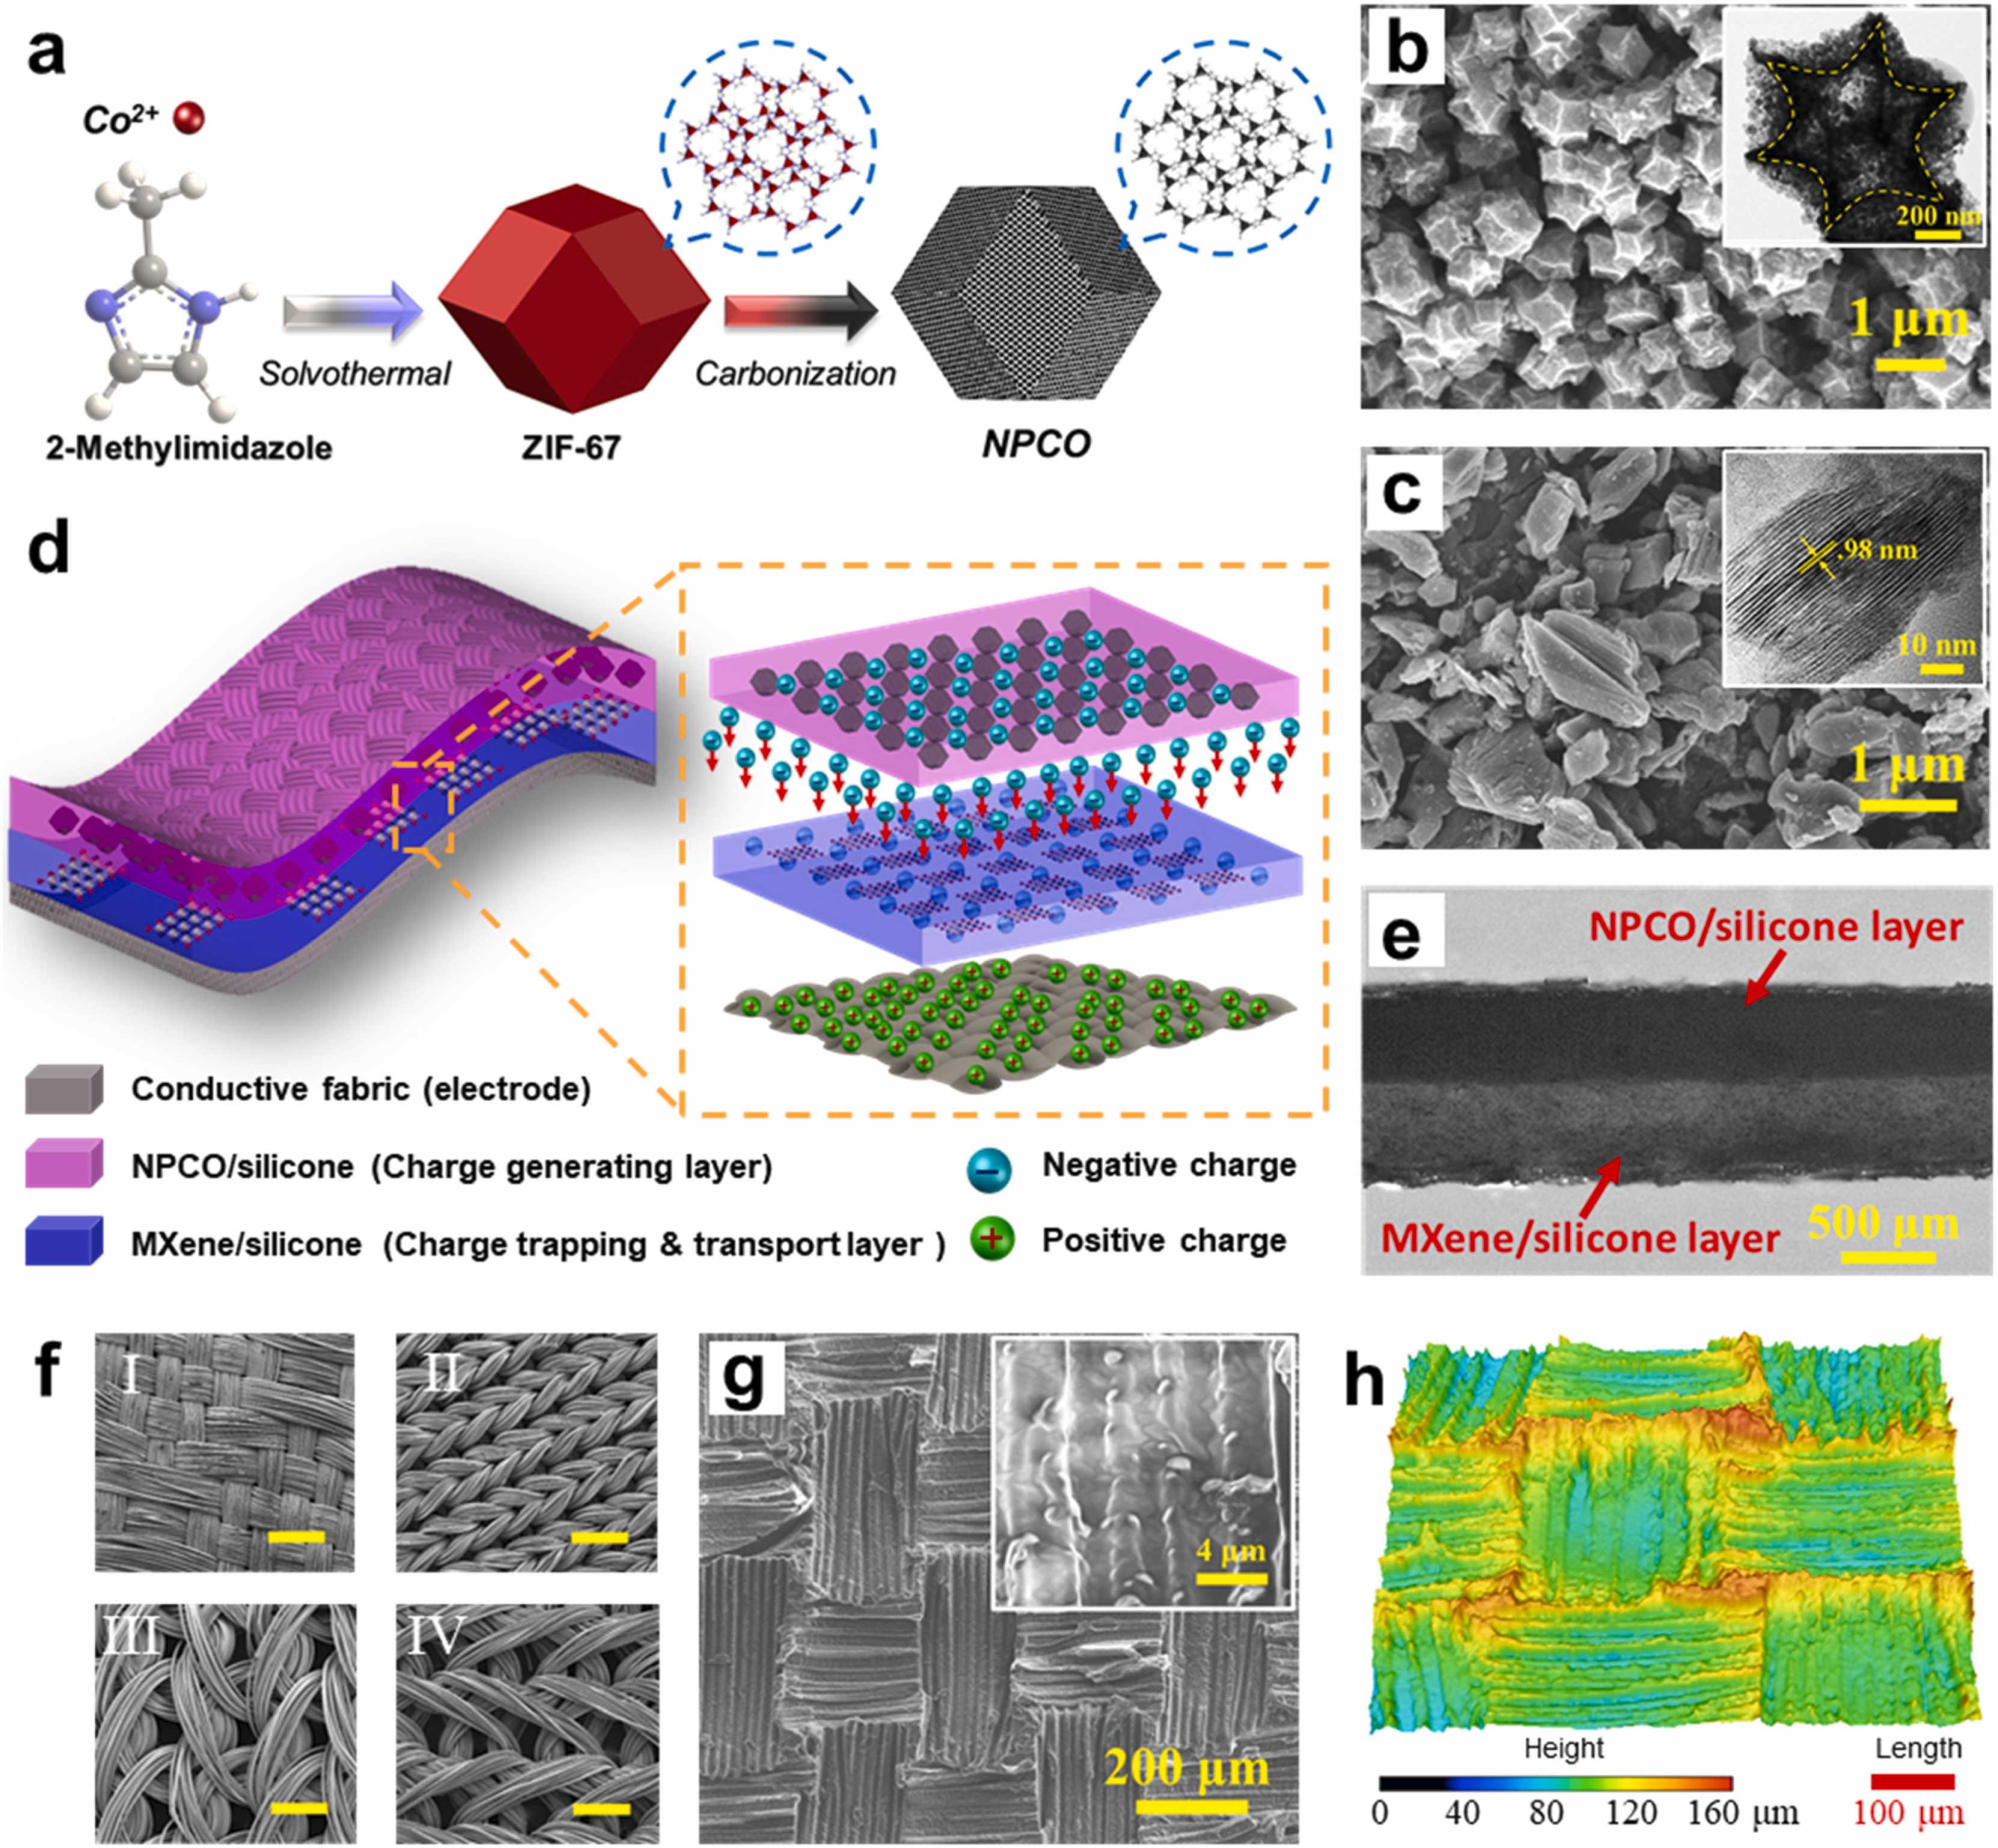 Silicone-incorporated nanoporous cobalt oxide and MXene nanocomposite-coated stretchable fabric for wearable triboelectric nanogenerator and self-powered sensing applications